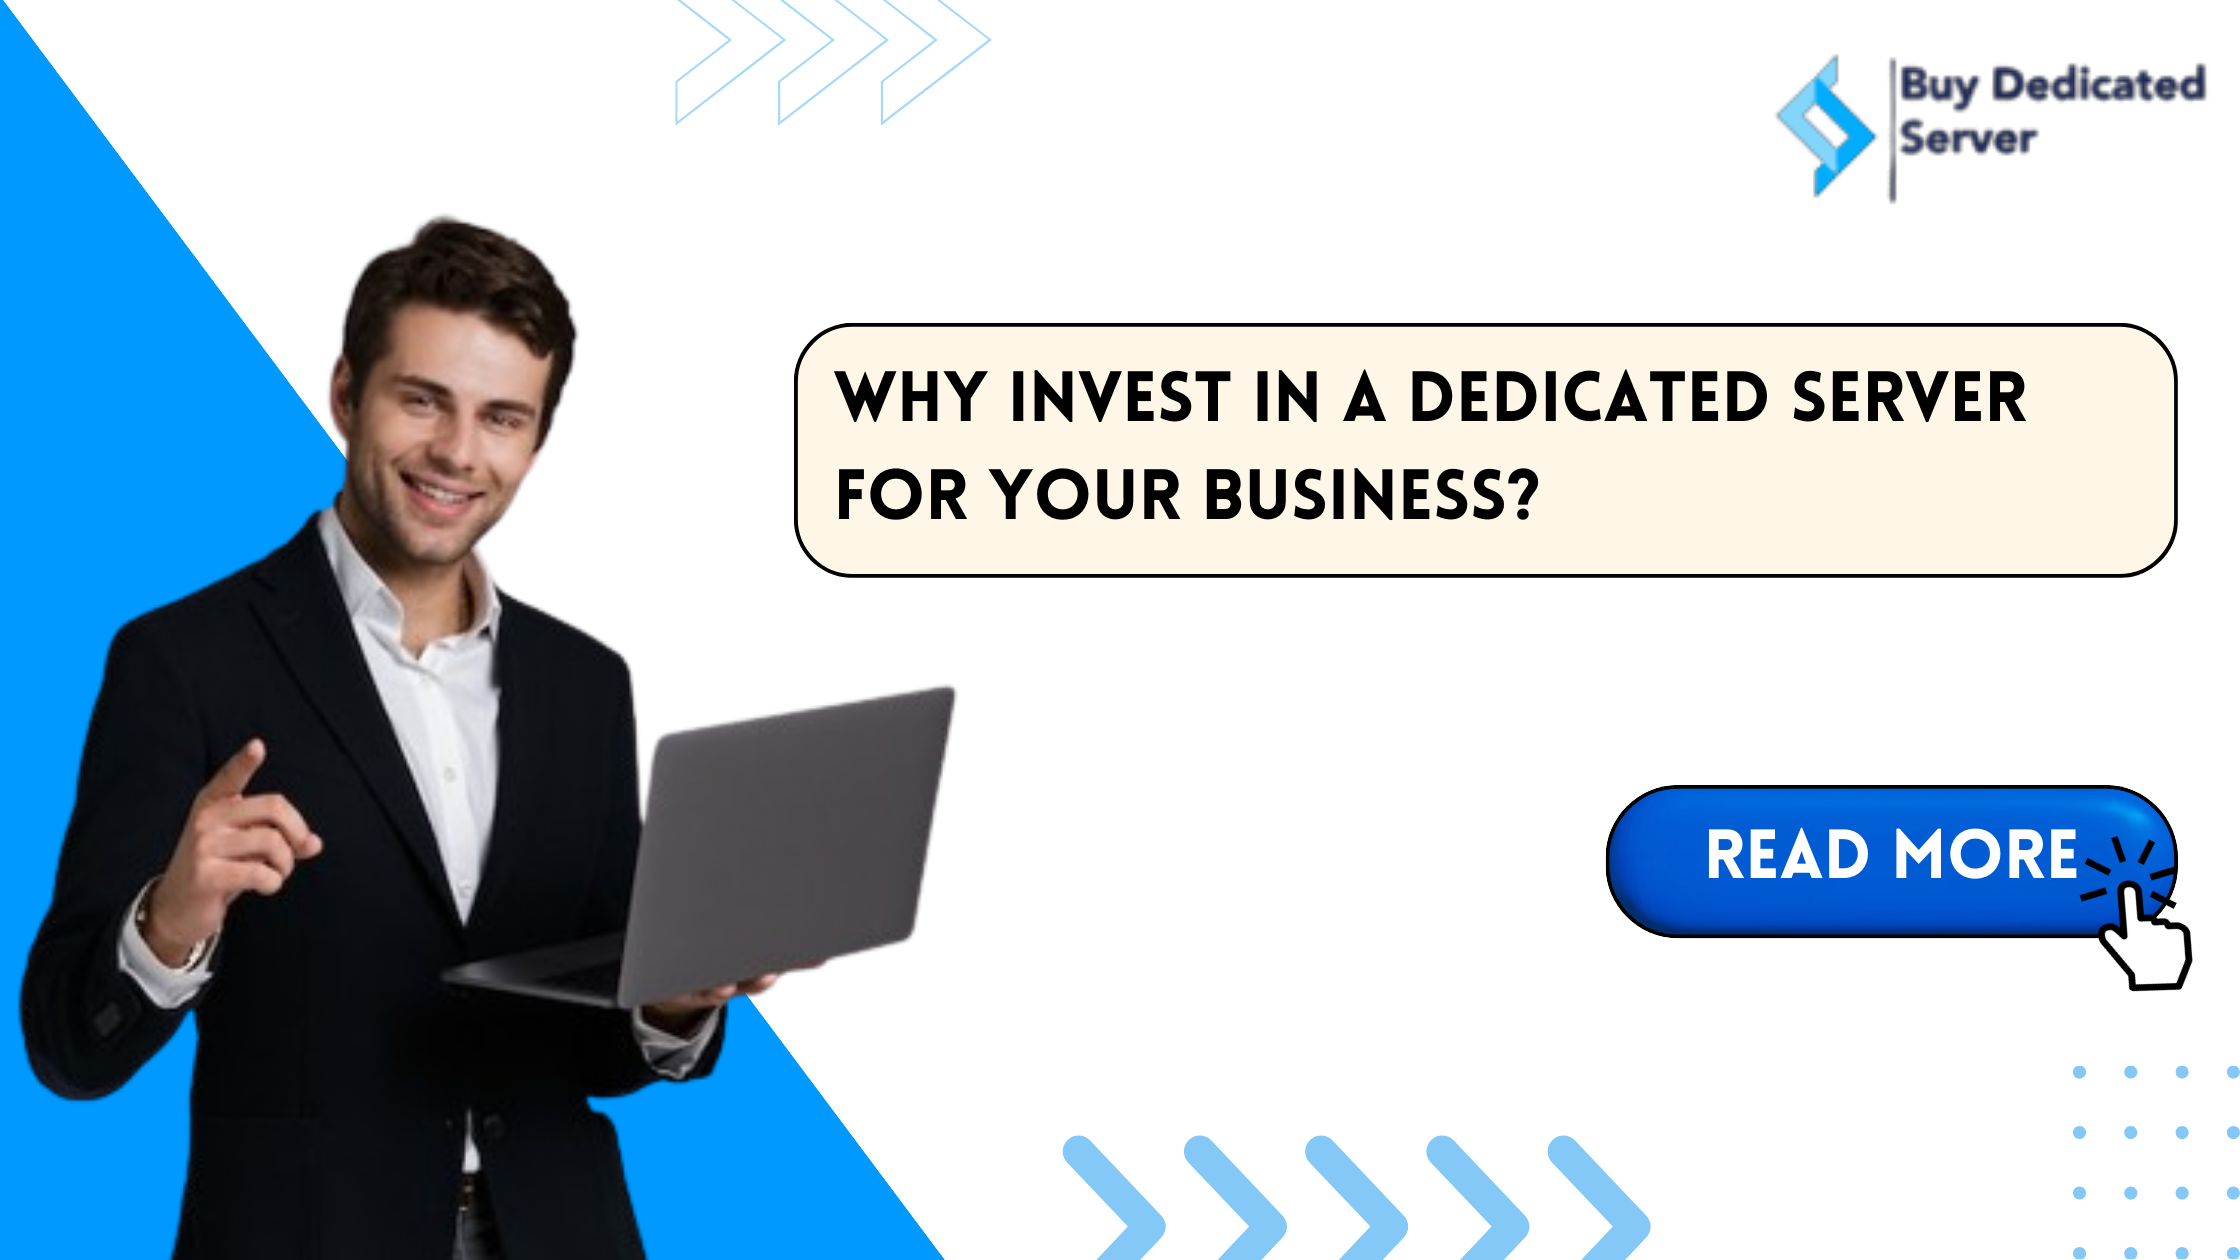 Why Invest in a Dedicated Server for Your Business?